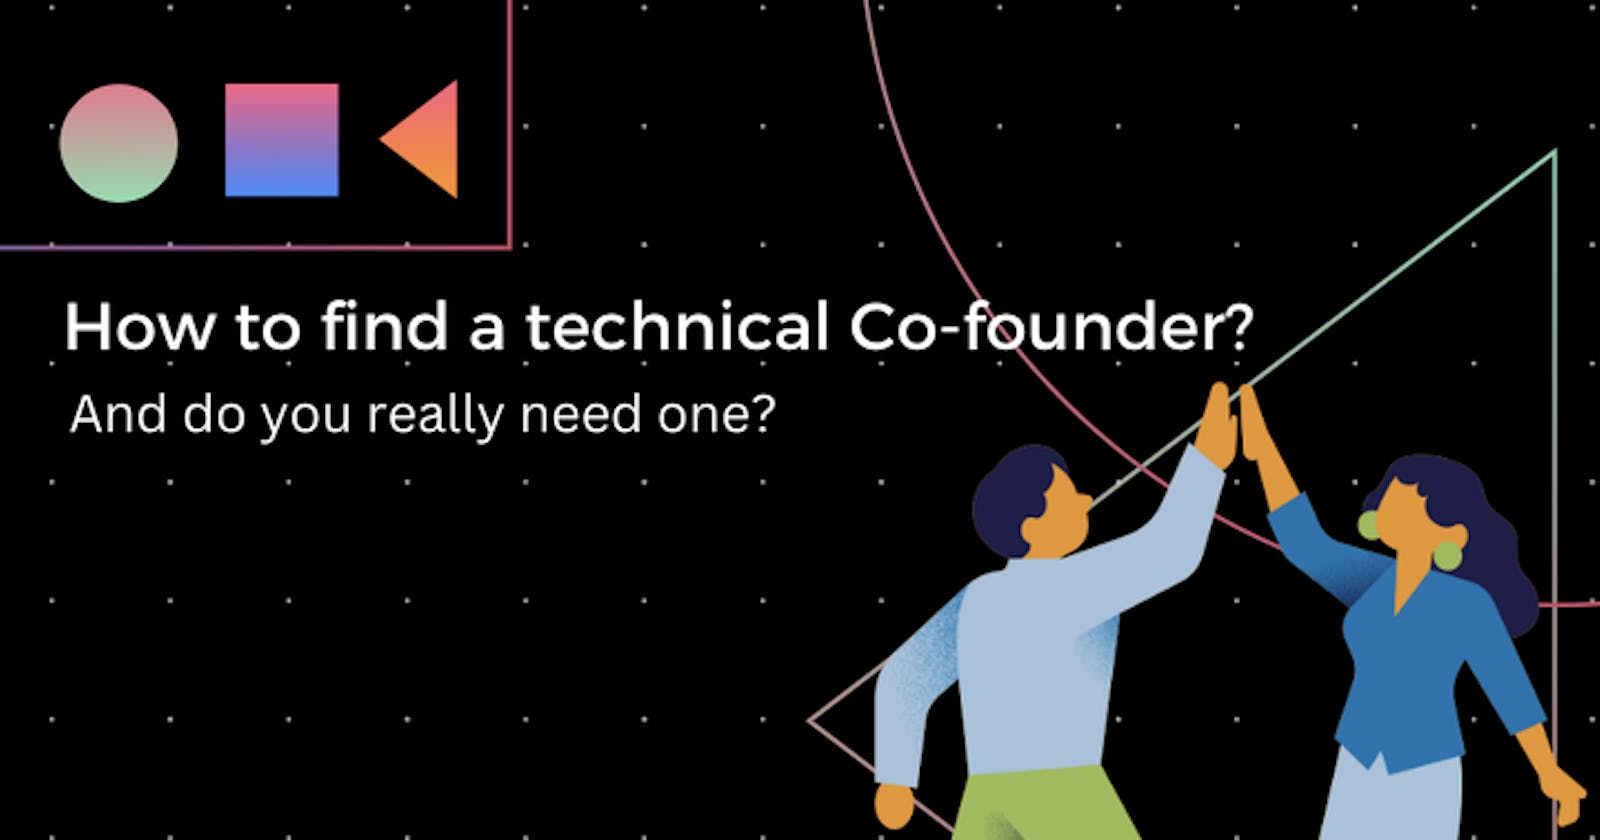 How to find a technical Co-founder? And do you really need one?